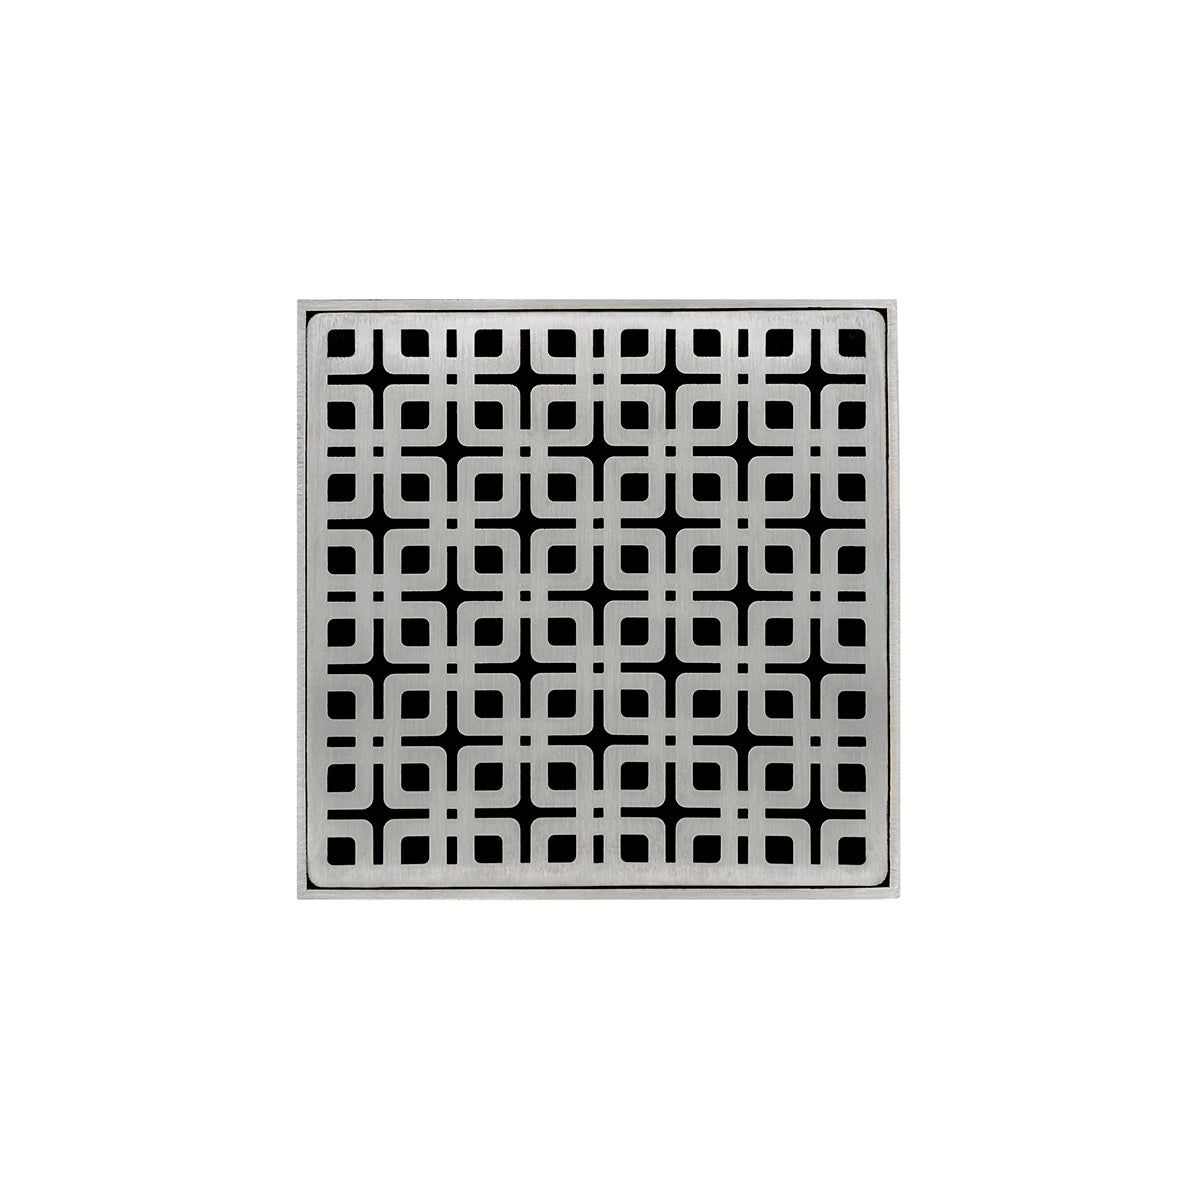 Infinity Drain 5" x 5" KD 5 Premium Center Drain Kit with Link Pattern Decorative Plate with Cast Iron Drain Body, 2" Outlet